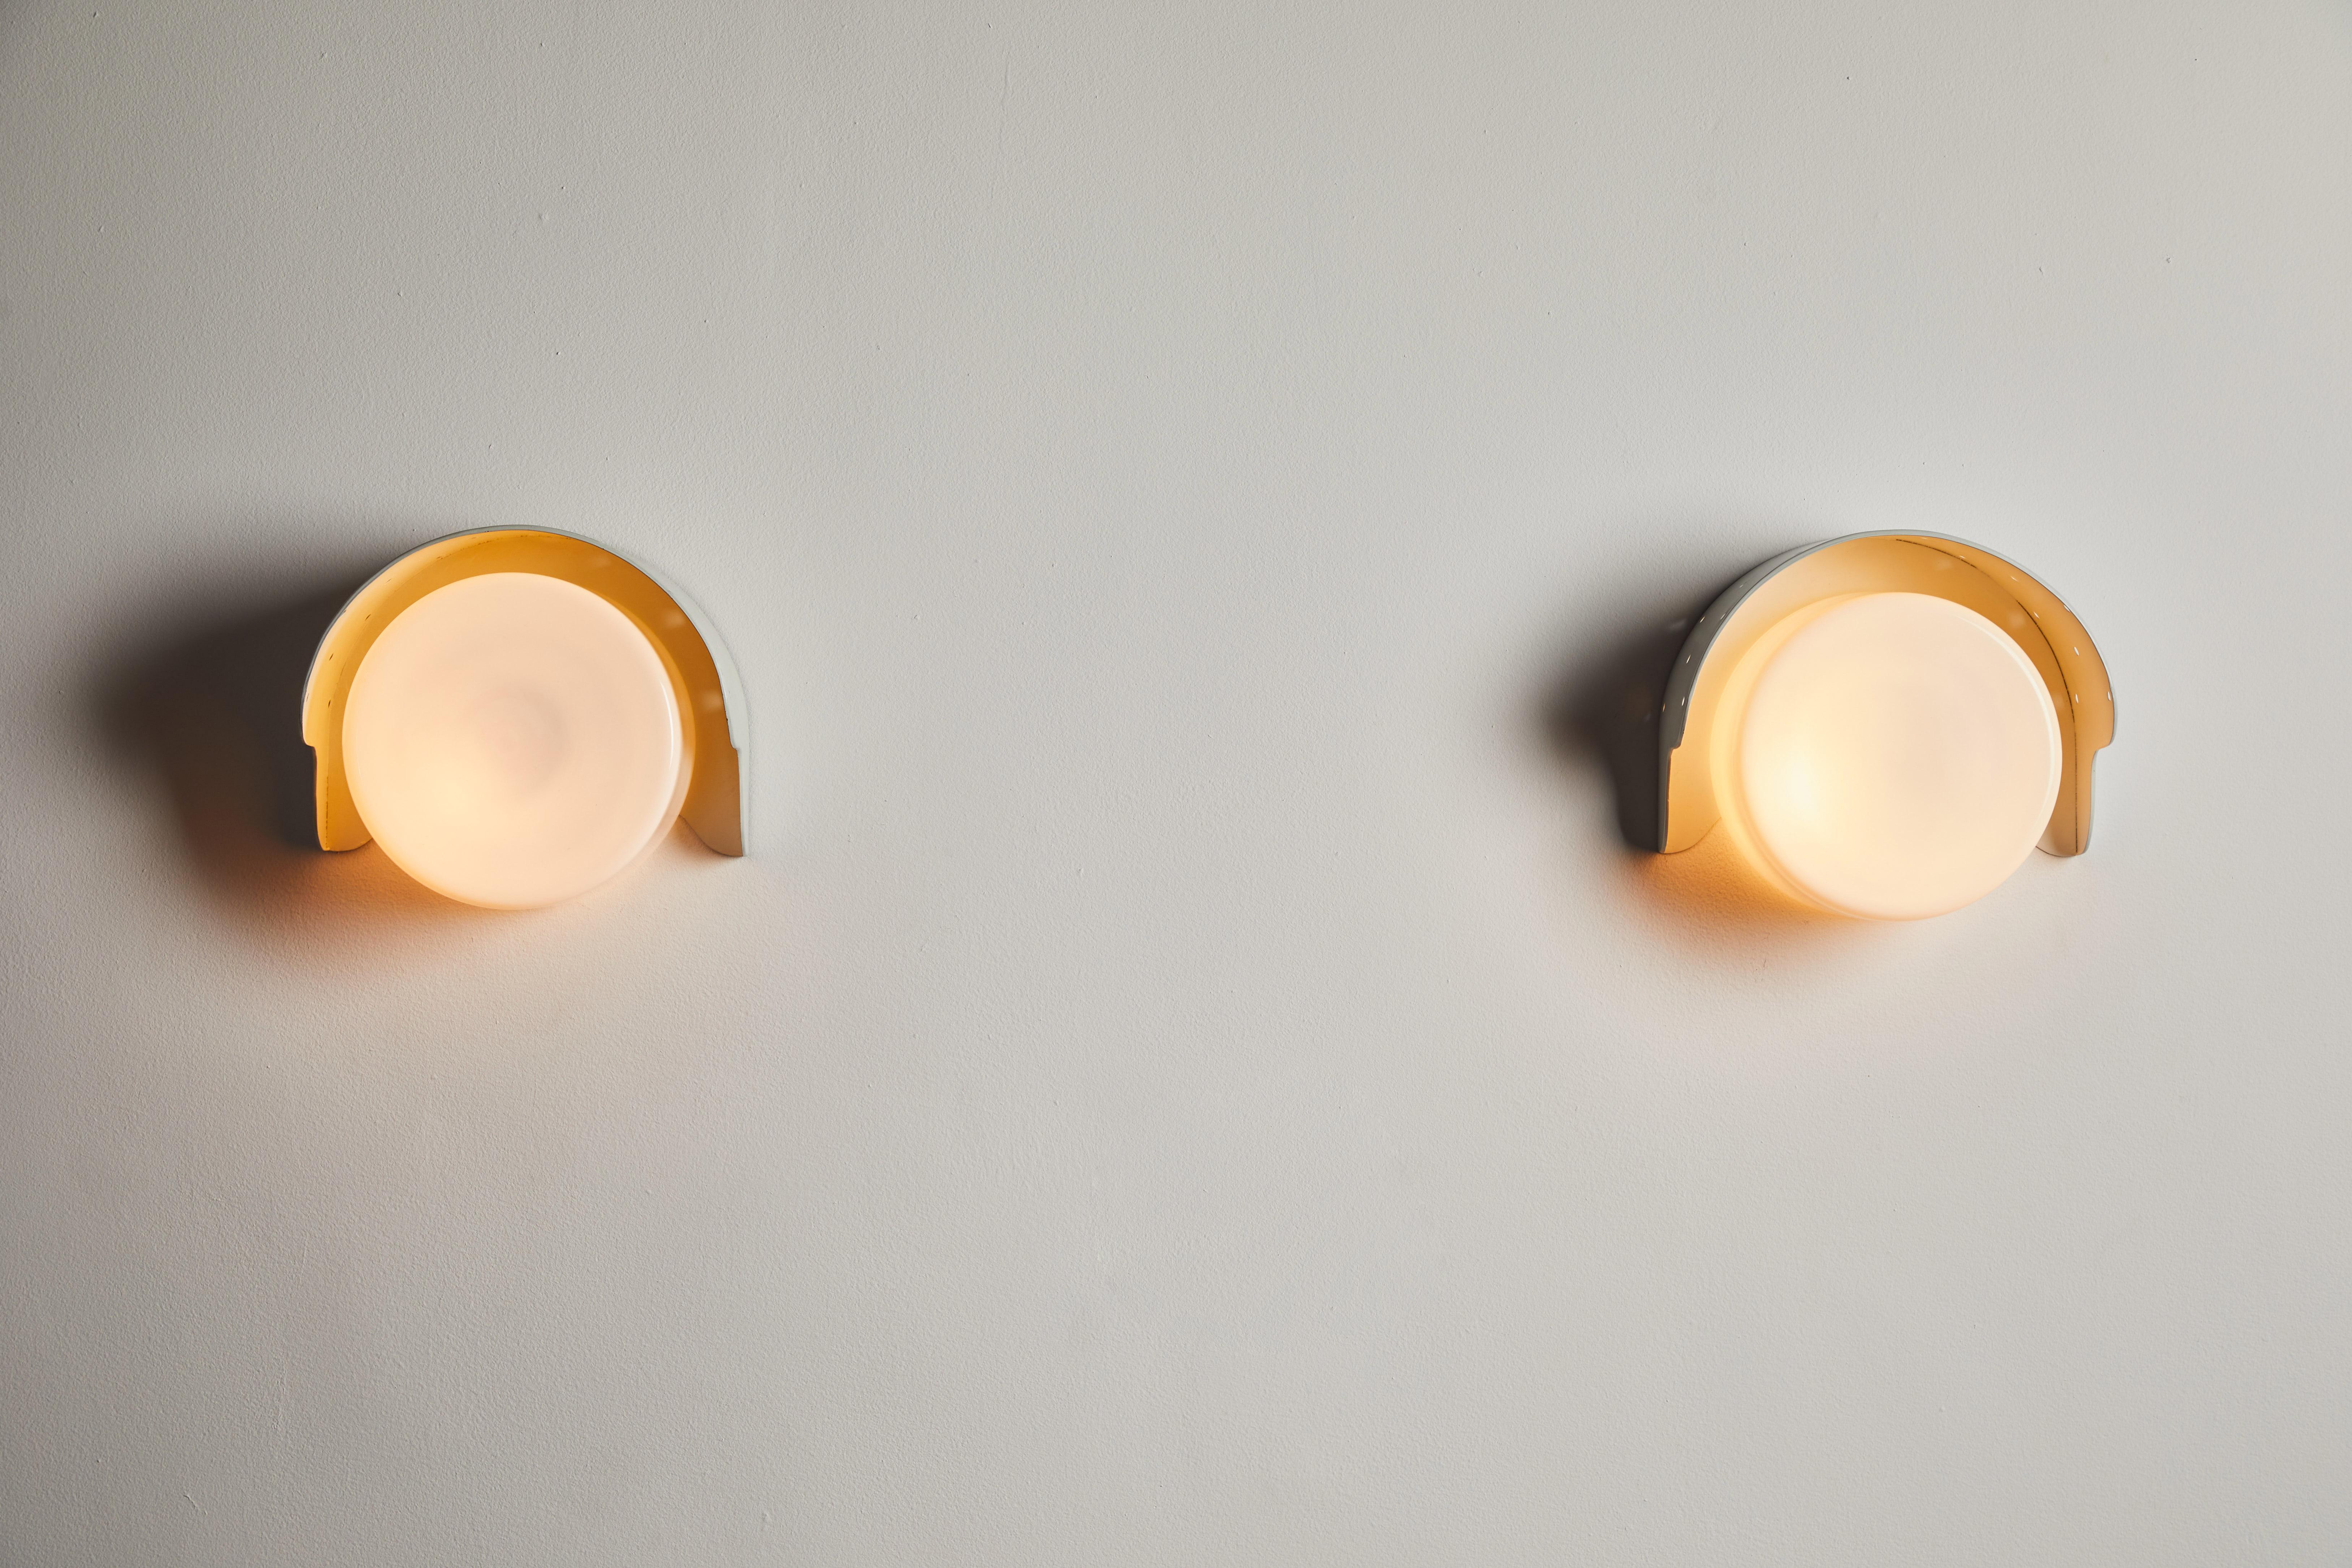 Pair of custom sconces by Paavo Tynell. Designed and manufactured in Finland, circa 1950s. Lacquered metal and glass. Rewired for U.S. standards. We recommend one E27 100w maximum bulb per sconce. Bulbs provided as a one time courtesy. Retains